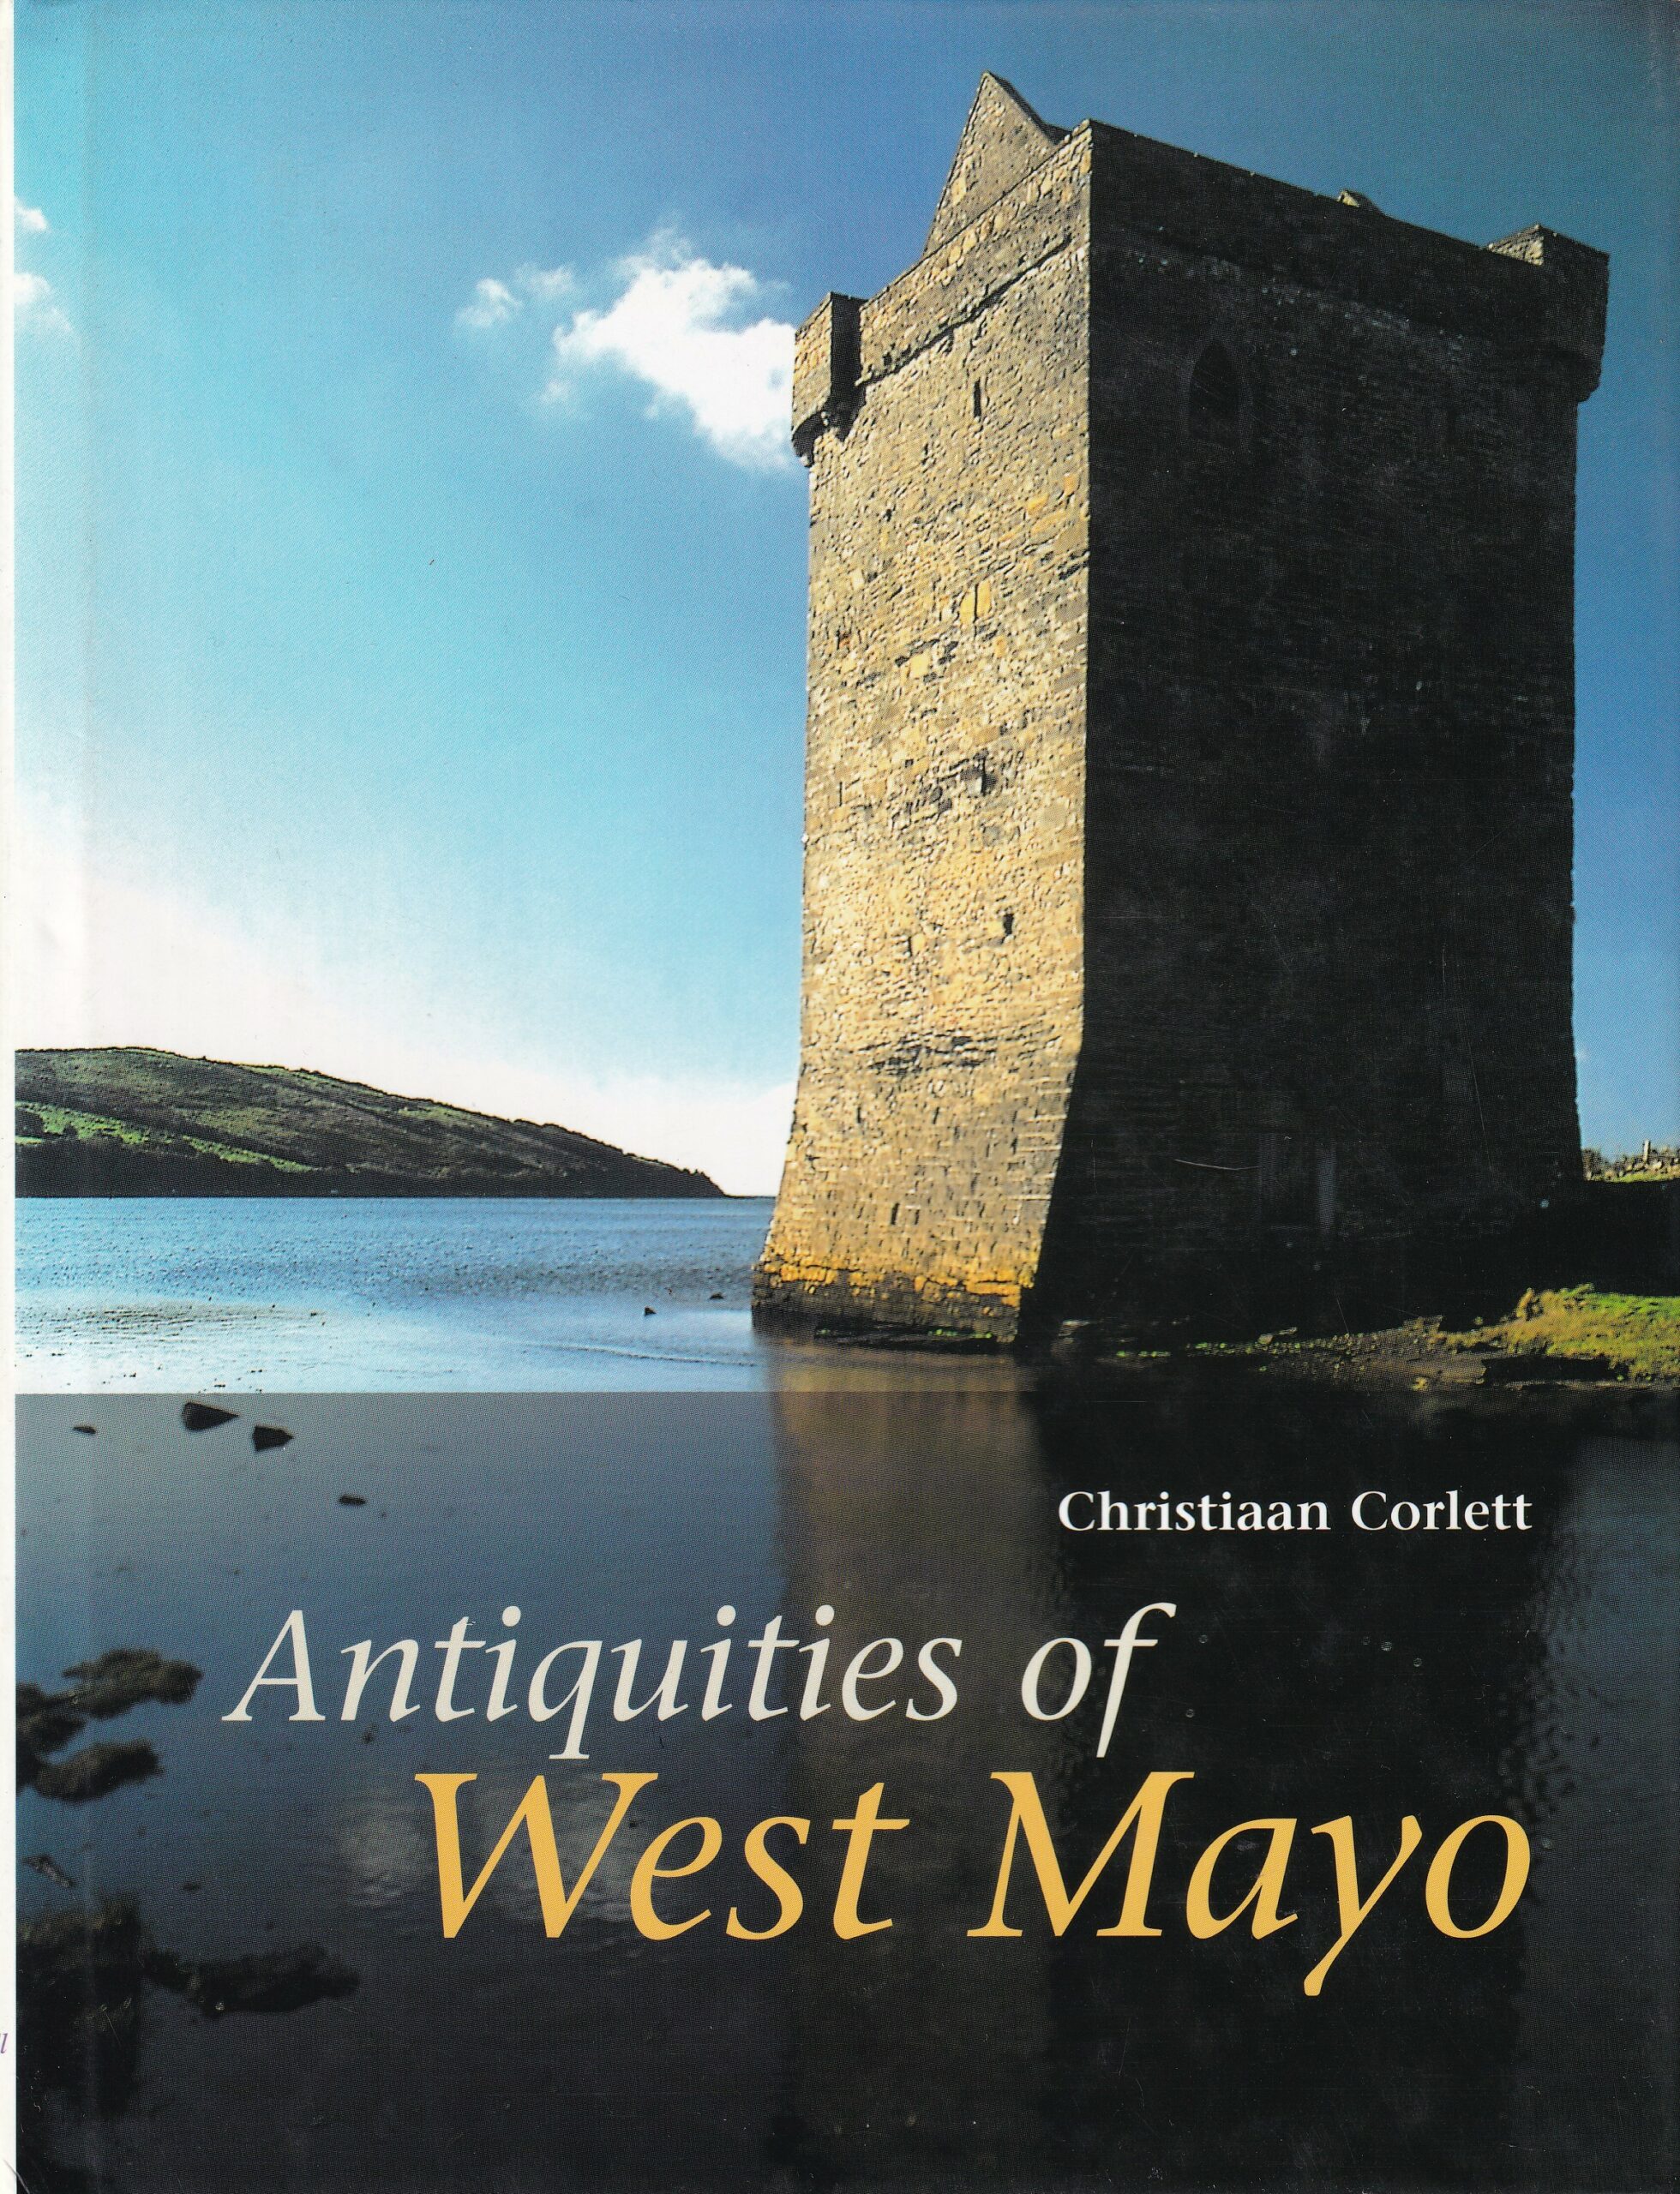 Antiquities of West Mayo by Christiaan Corlett